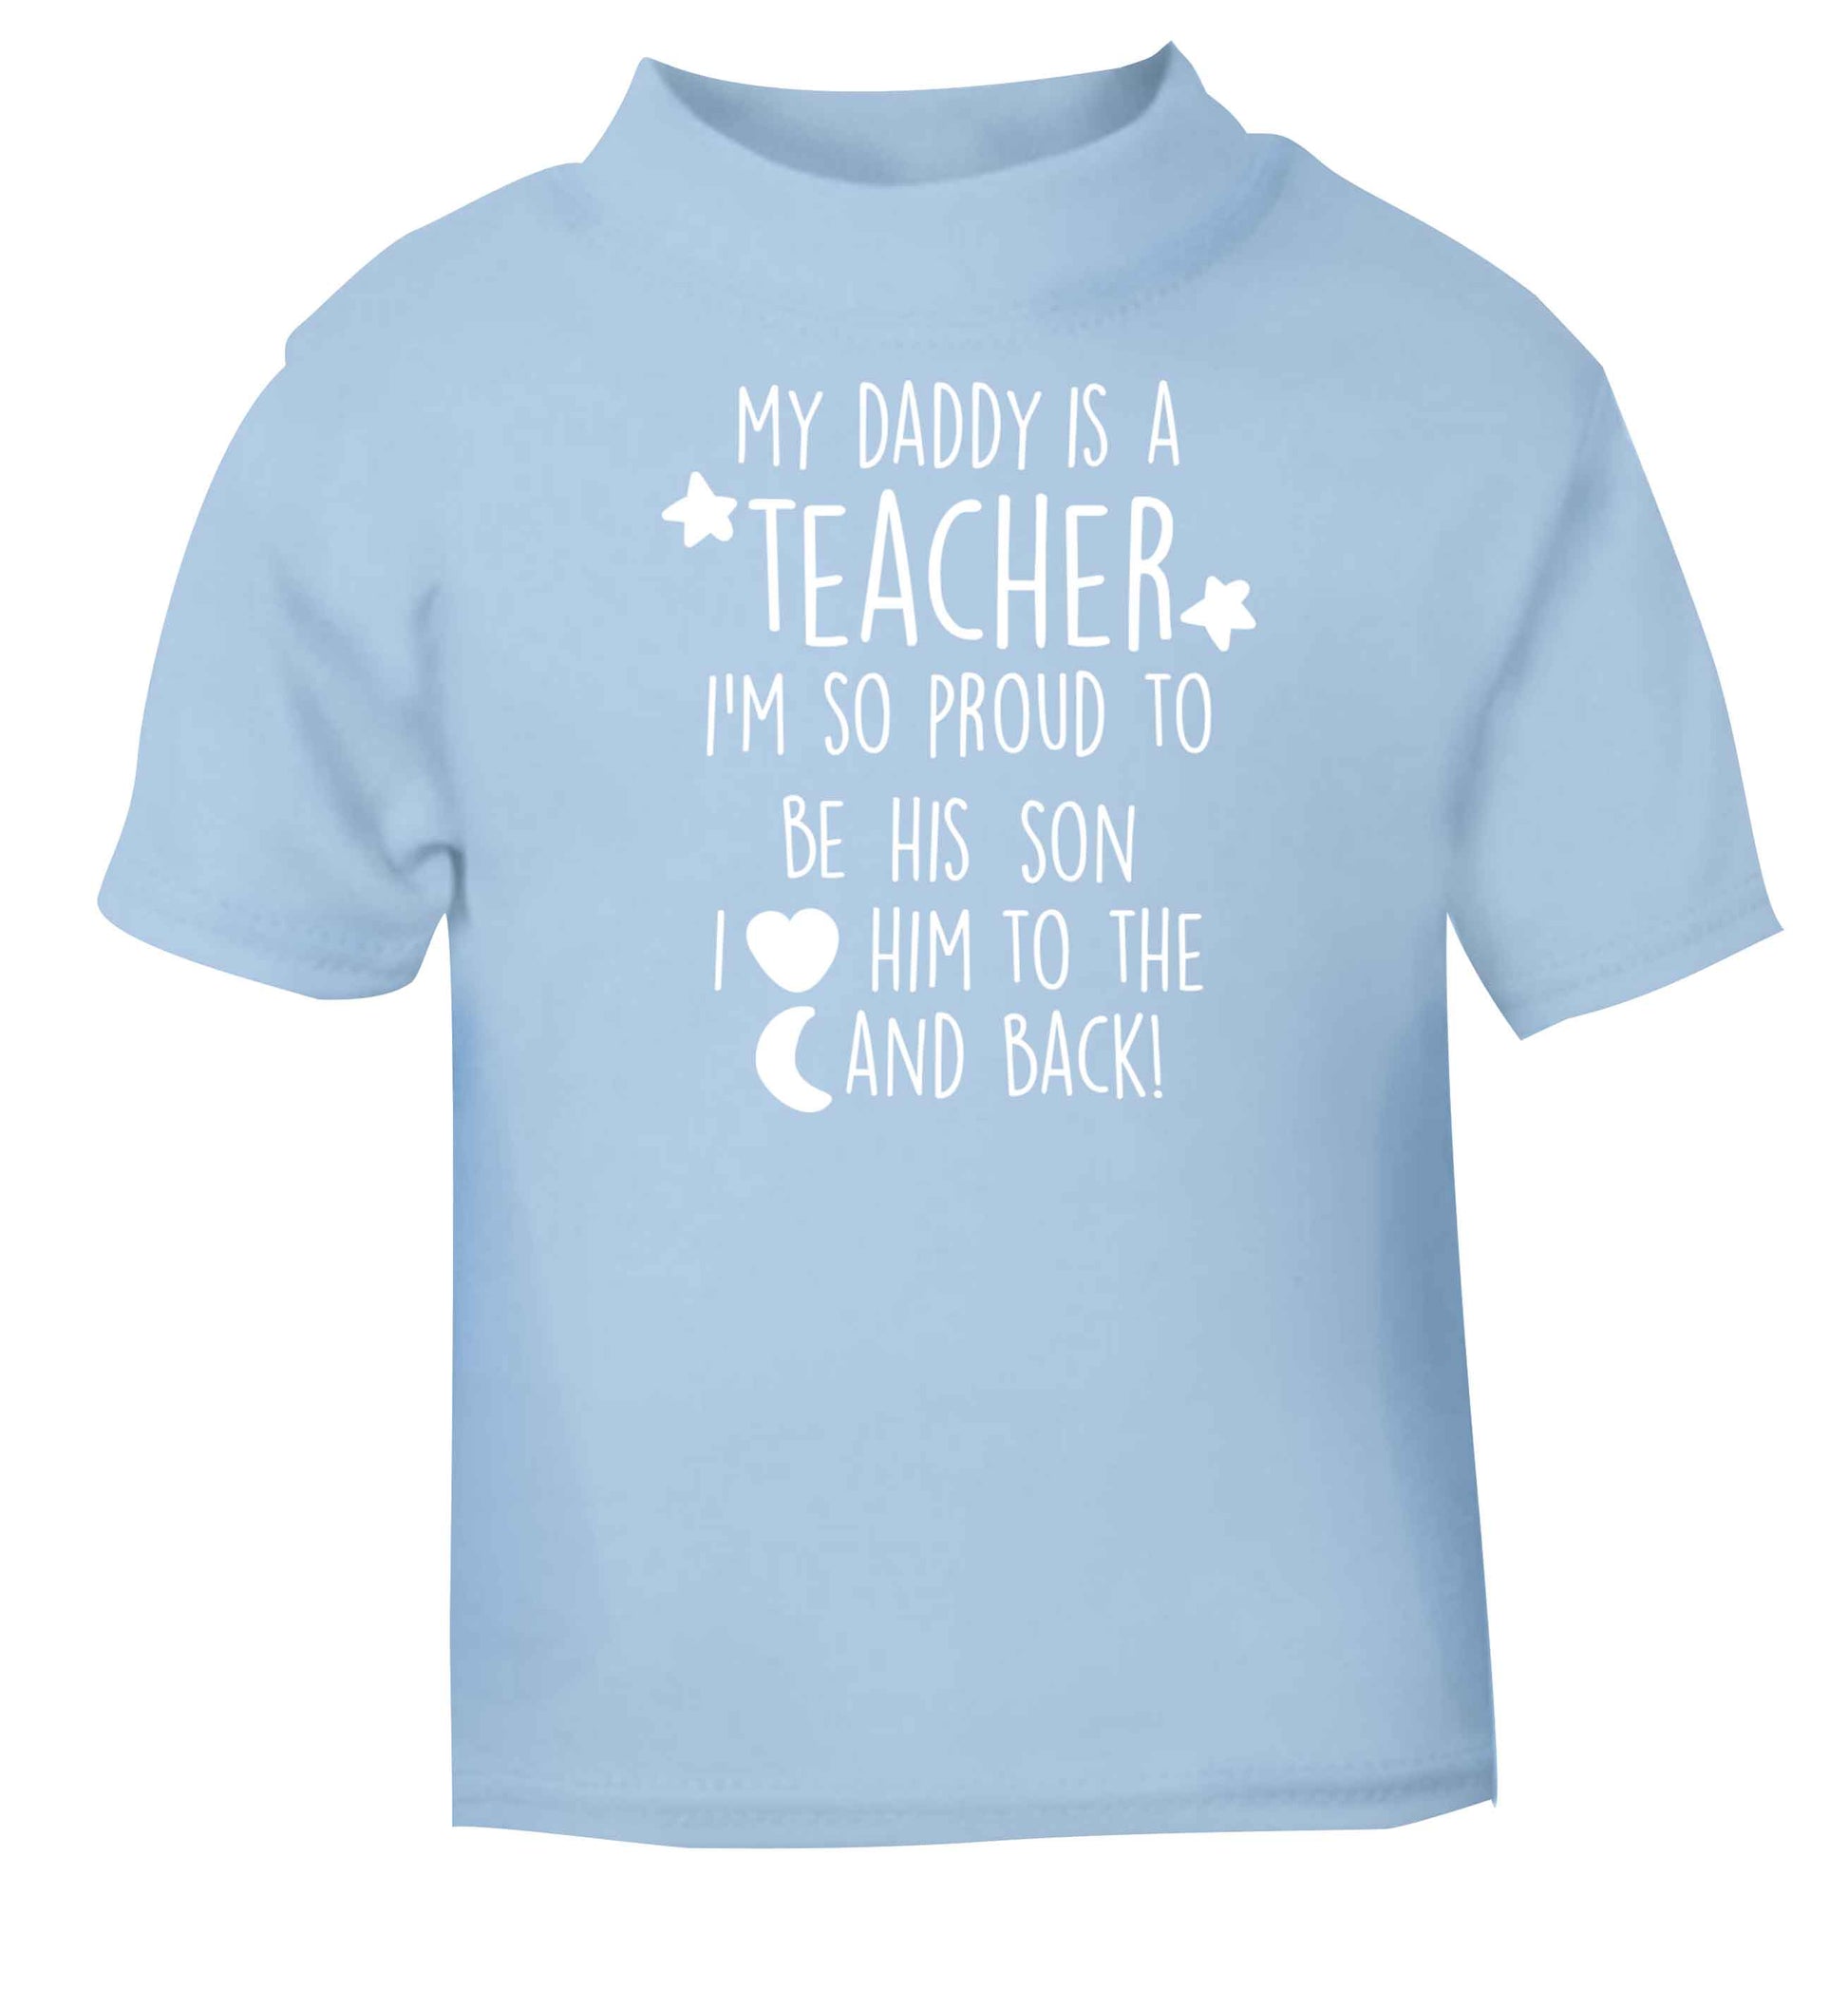 My daddy is a teacher I'm so proud to be his son I love her to the moon and back light blue baby toddler Tshirt 2 Years